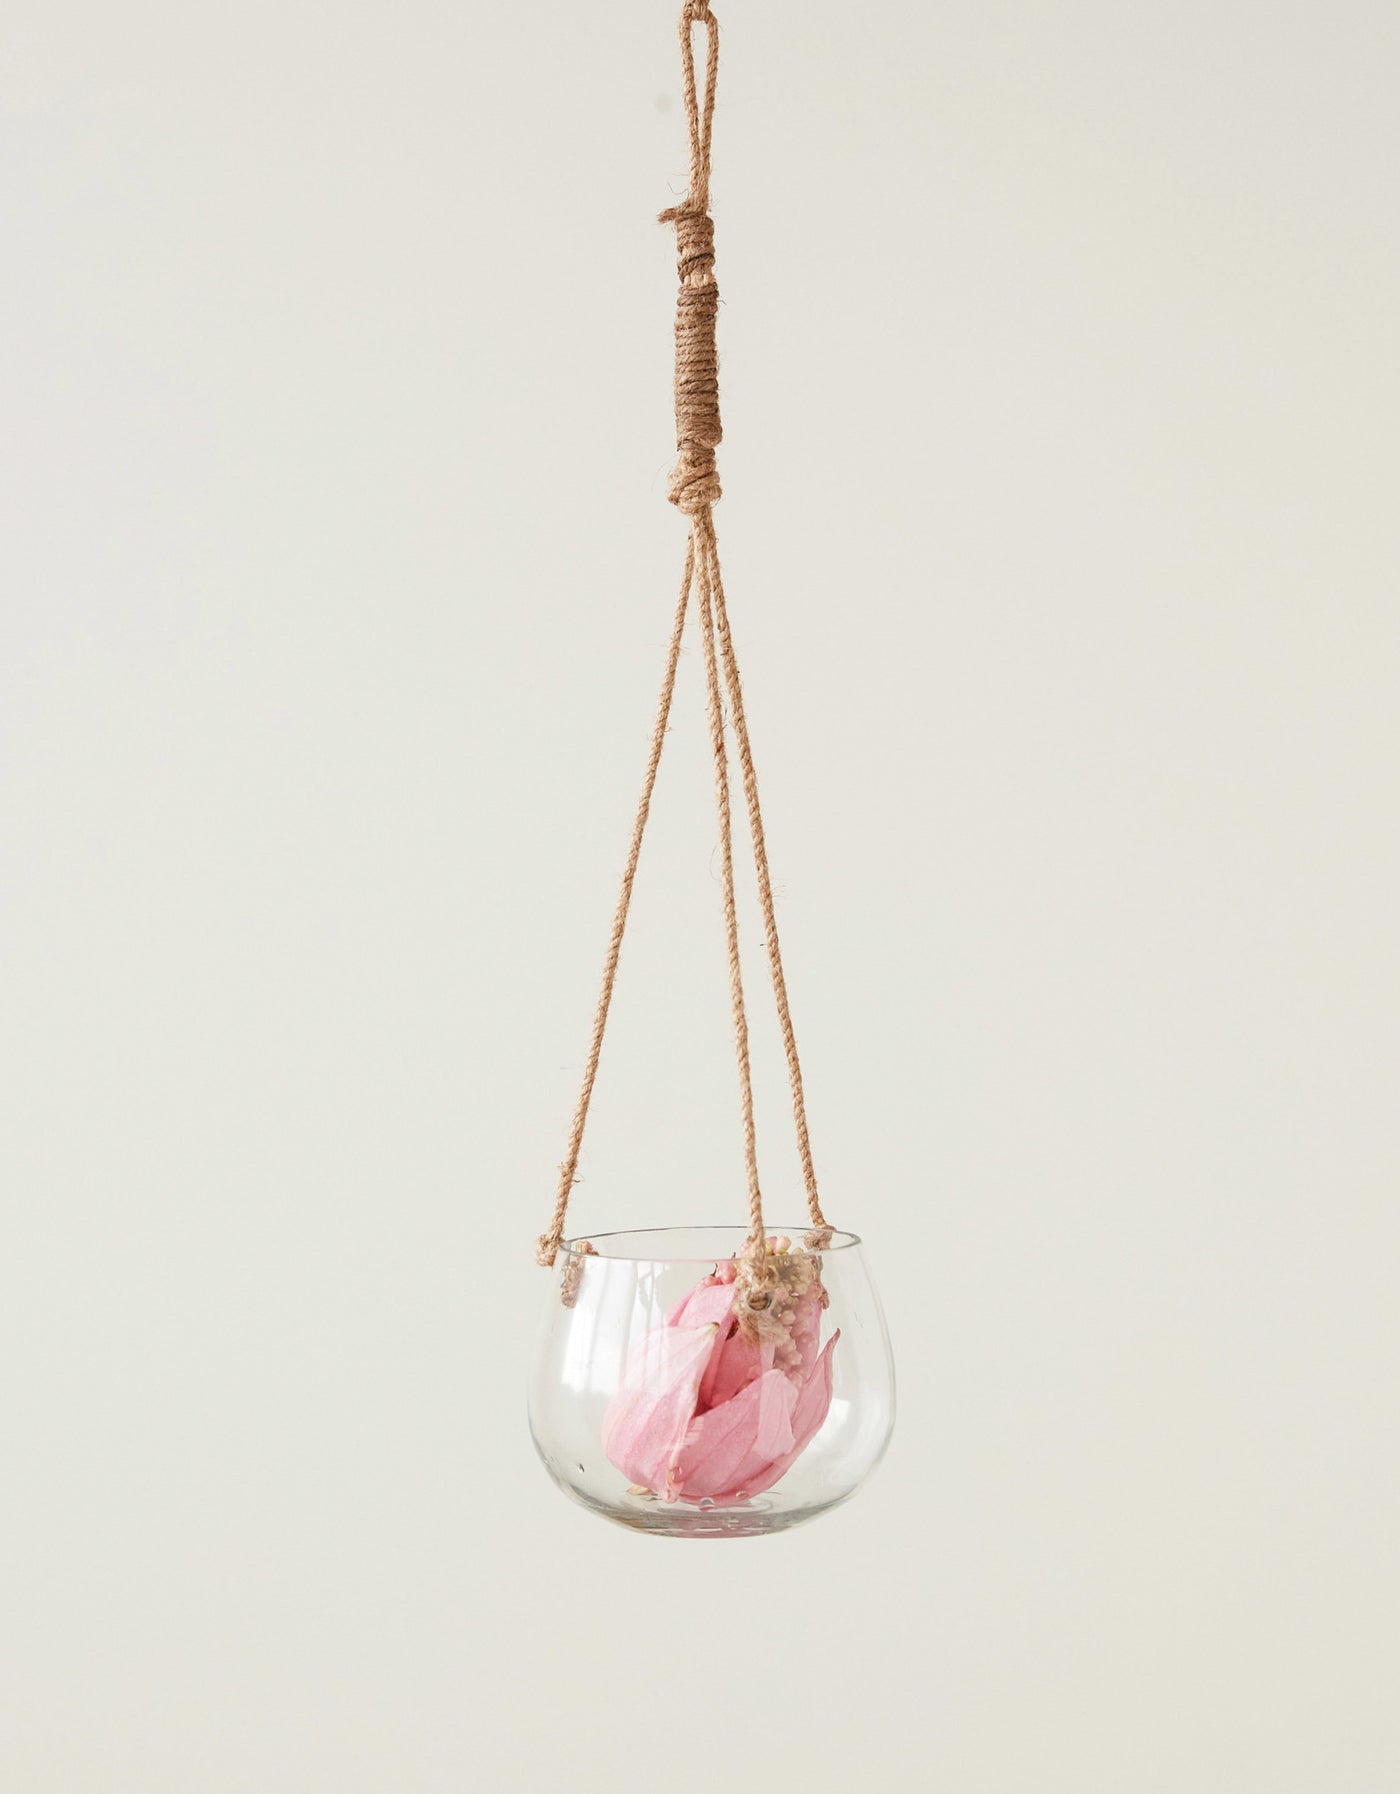 Hanging Vase/Planter with Jute Rope